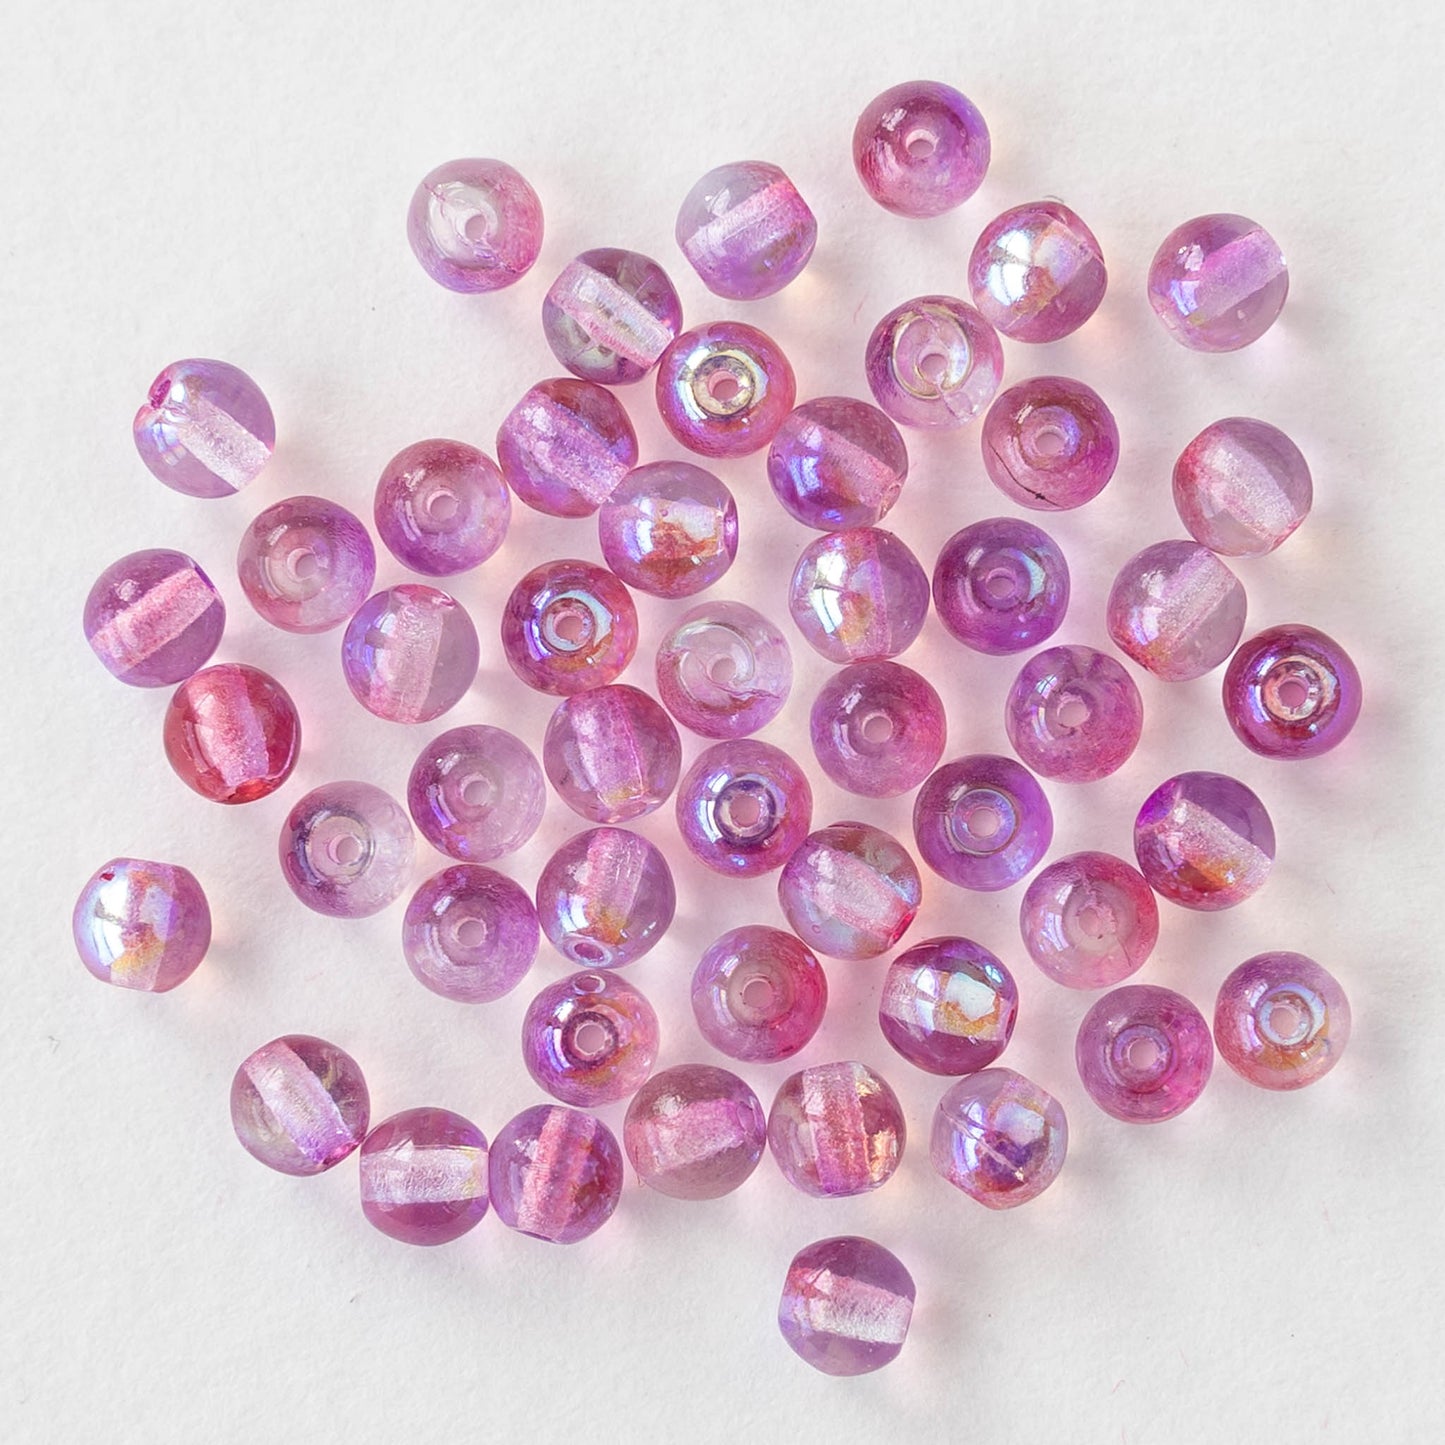 Load image into Gallery viewer, 4mm Round Glass Beads - Bubbly Pink - 50 Beads
